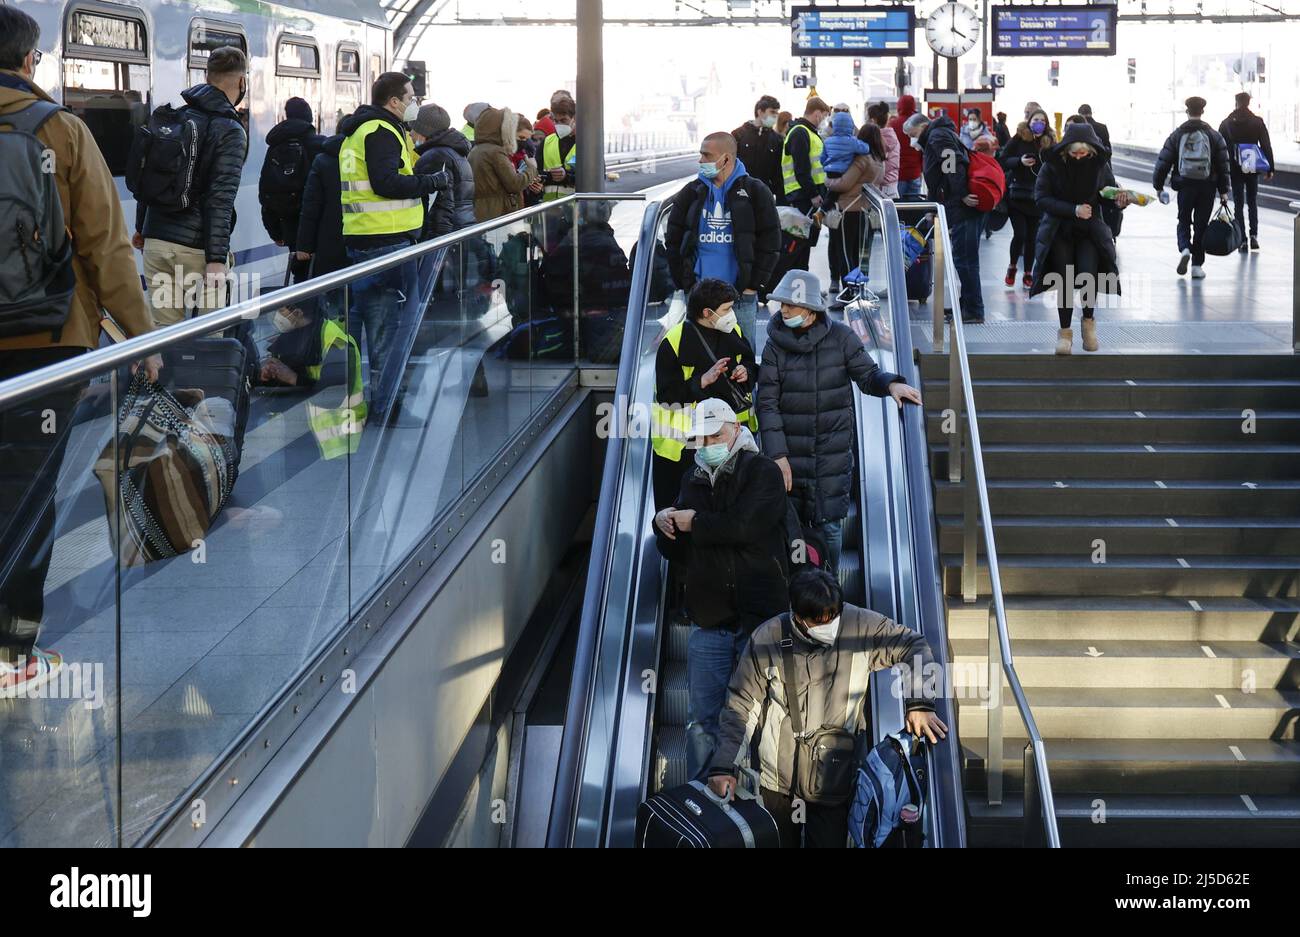 Berlin, 02.03.2022 - Refugees from Ukraine arrive at Berlin Central Station. Thousands of refugees from Ukraine have already arrived in Germany. [automated translation] Stock Photo